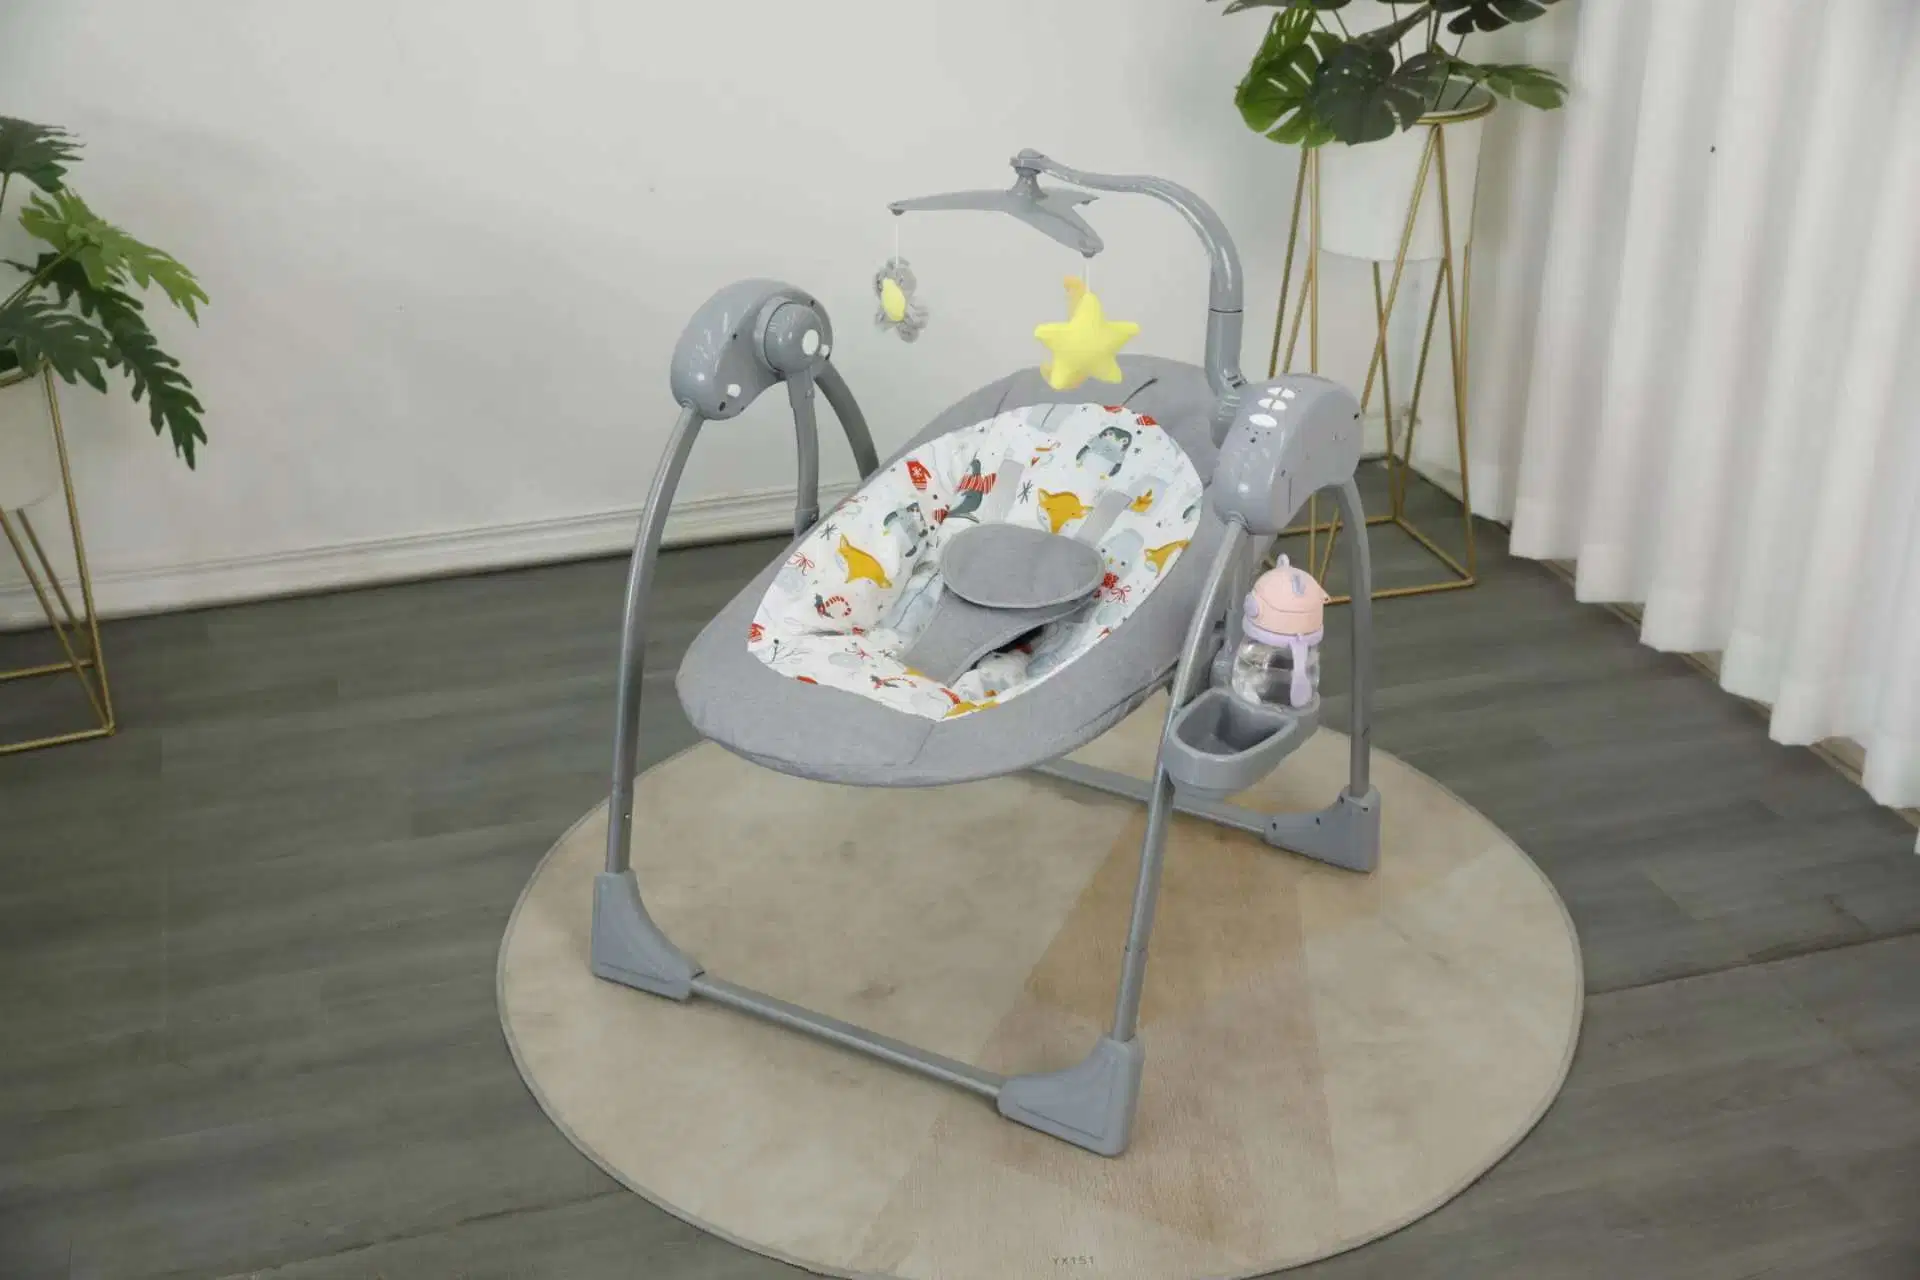 Bestselling Children's Electric Rocking Chair/Bluetooth Connectivity/Baby Sleeping Rocking Chair